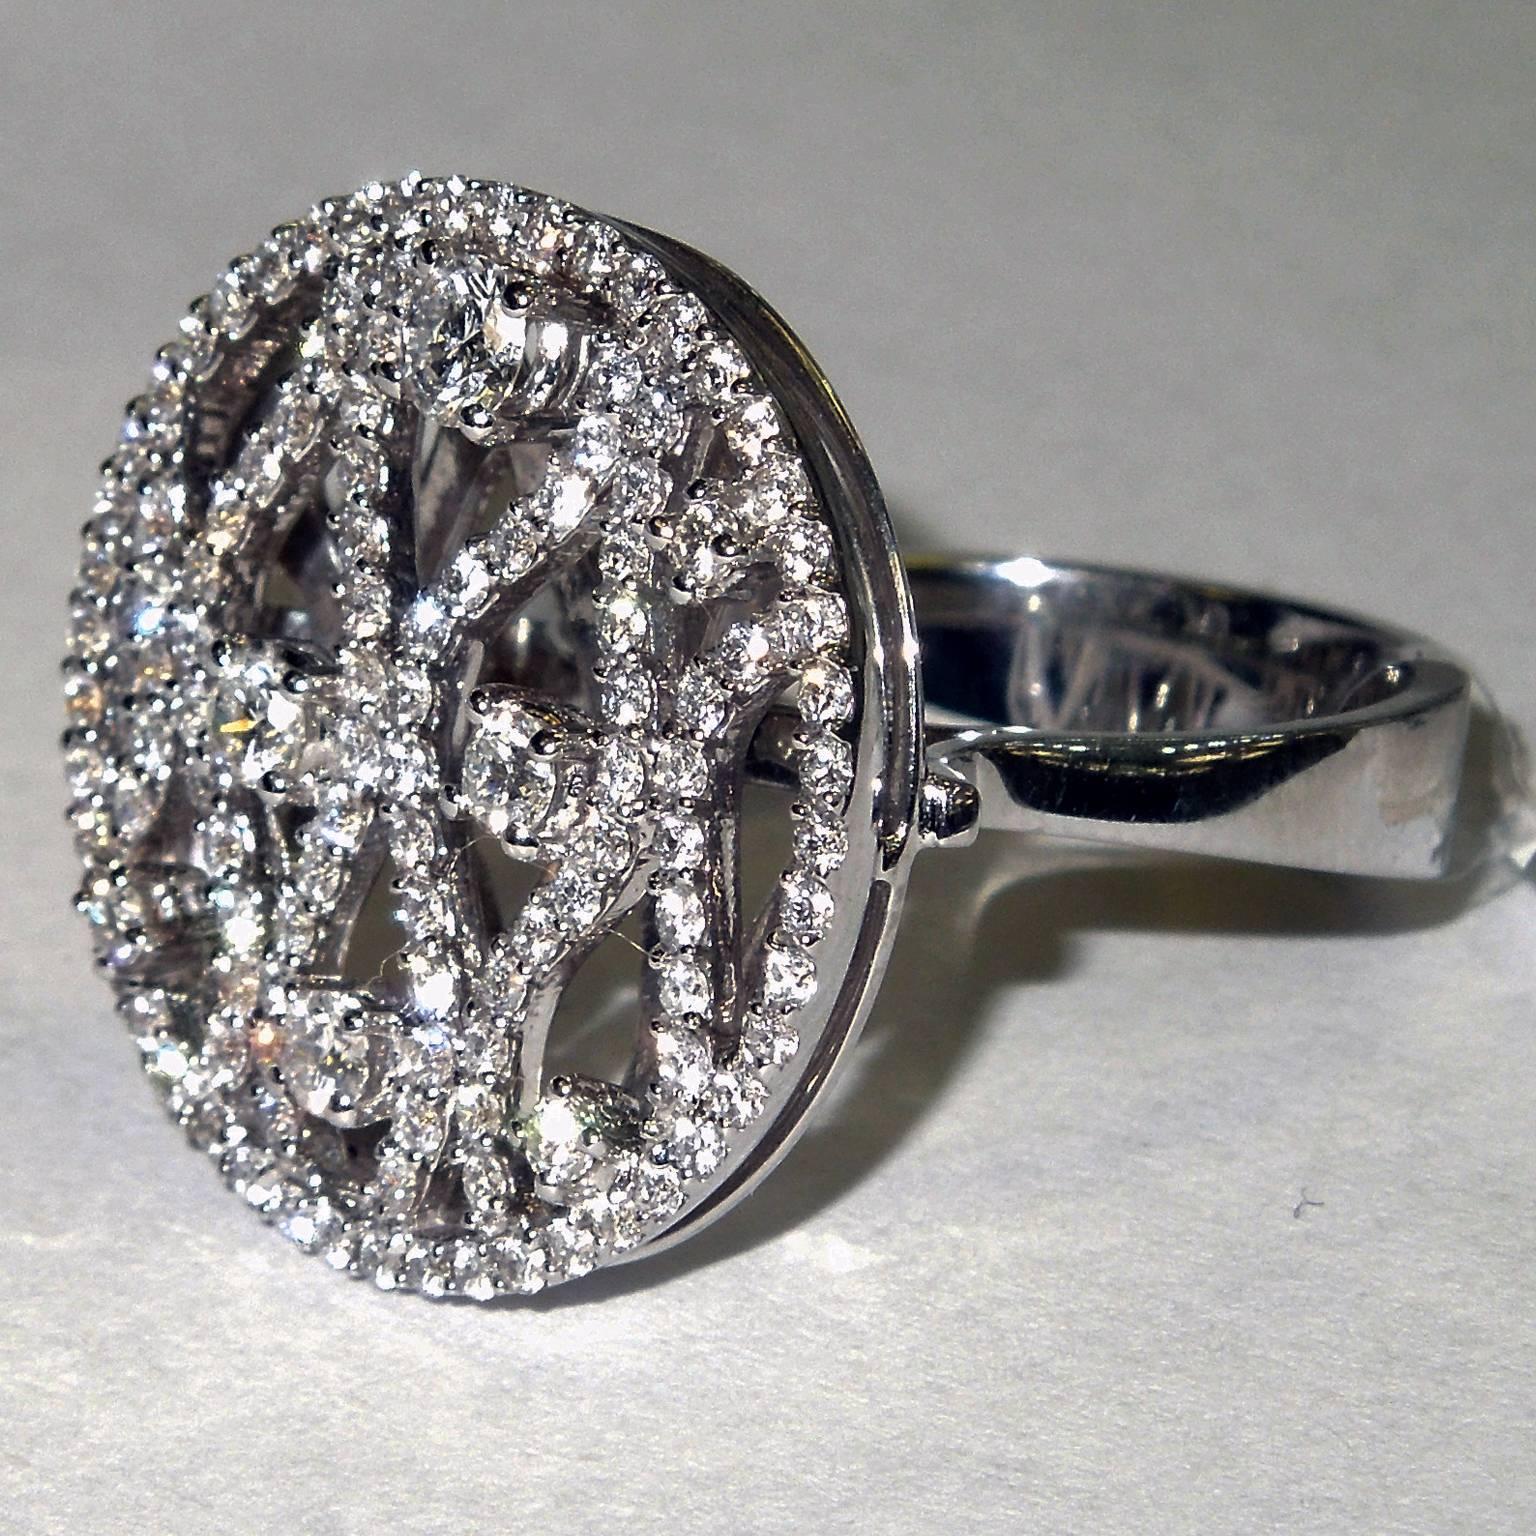 18K White Gold Ring with Diamonds

1.32ct. G Color, VS Clarity Diamonds

Face of ring is 0.85 inch round

Ring is size 7. Can be sized.

